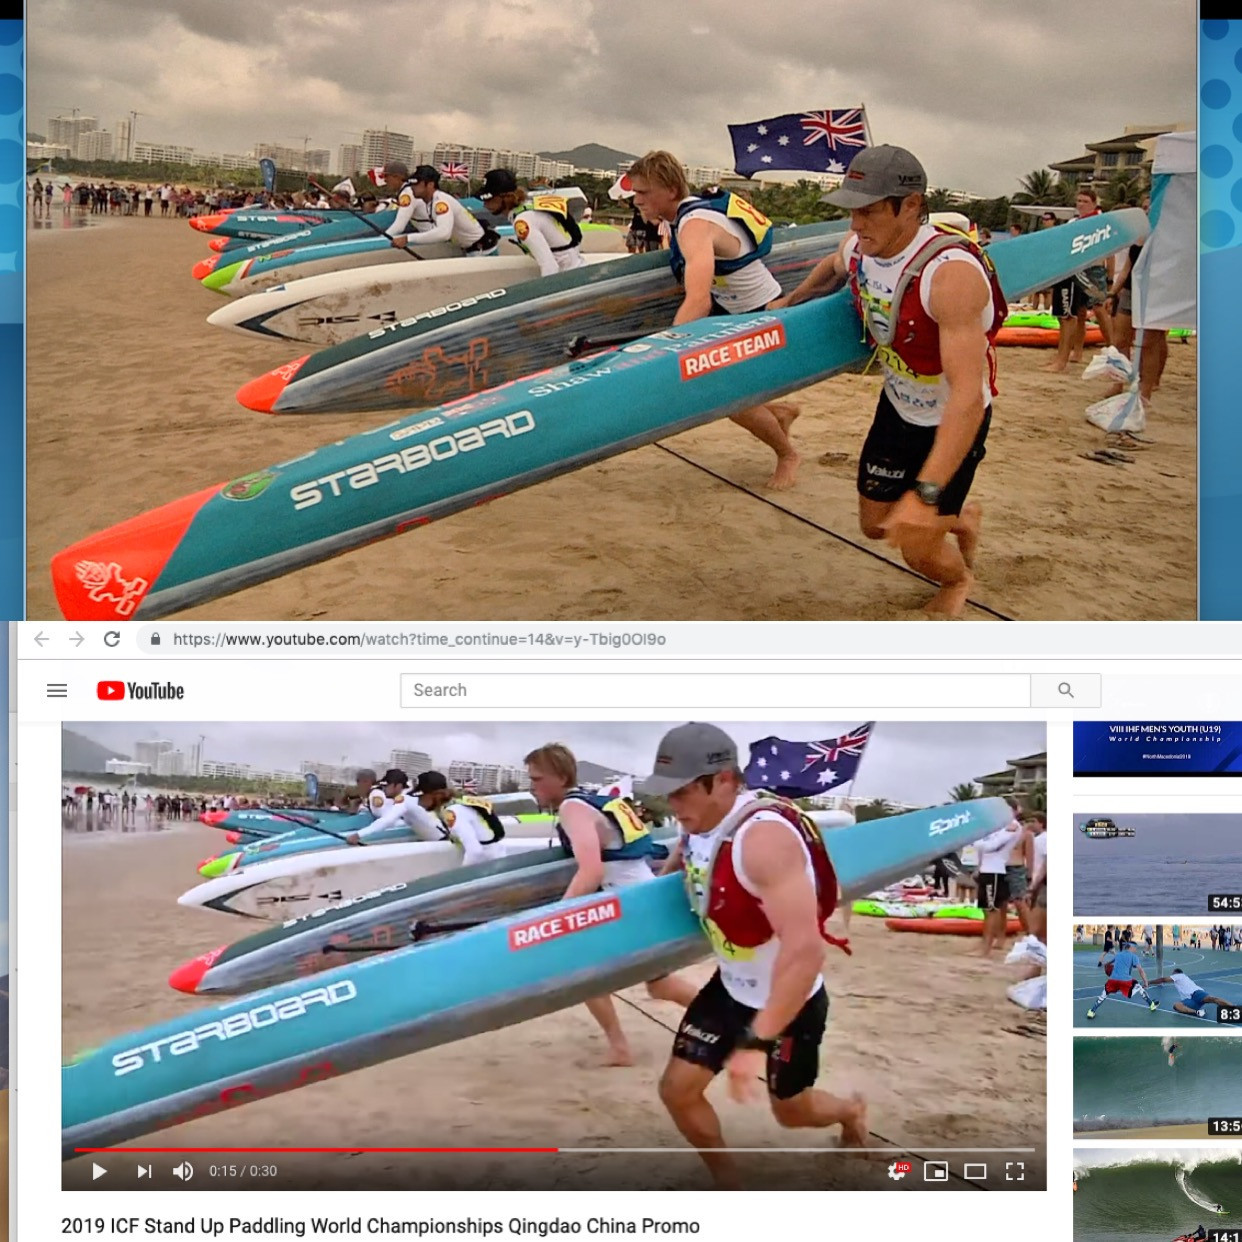 Exclusive: ISA accuse ICF of "infringement of copyright" over SUP World Championship video